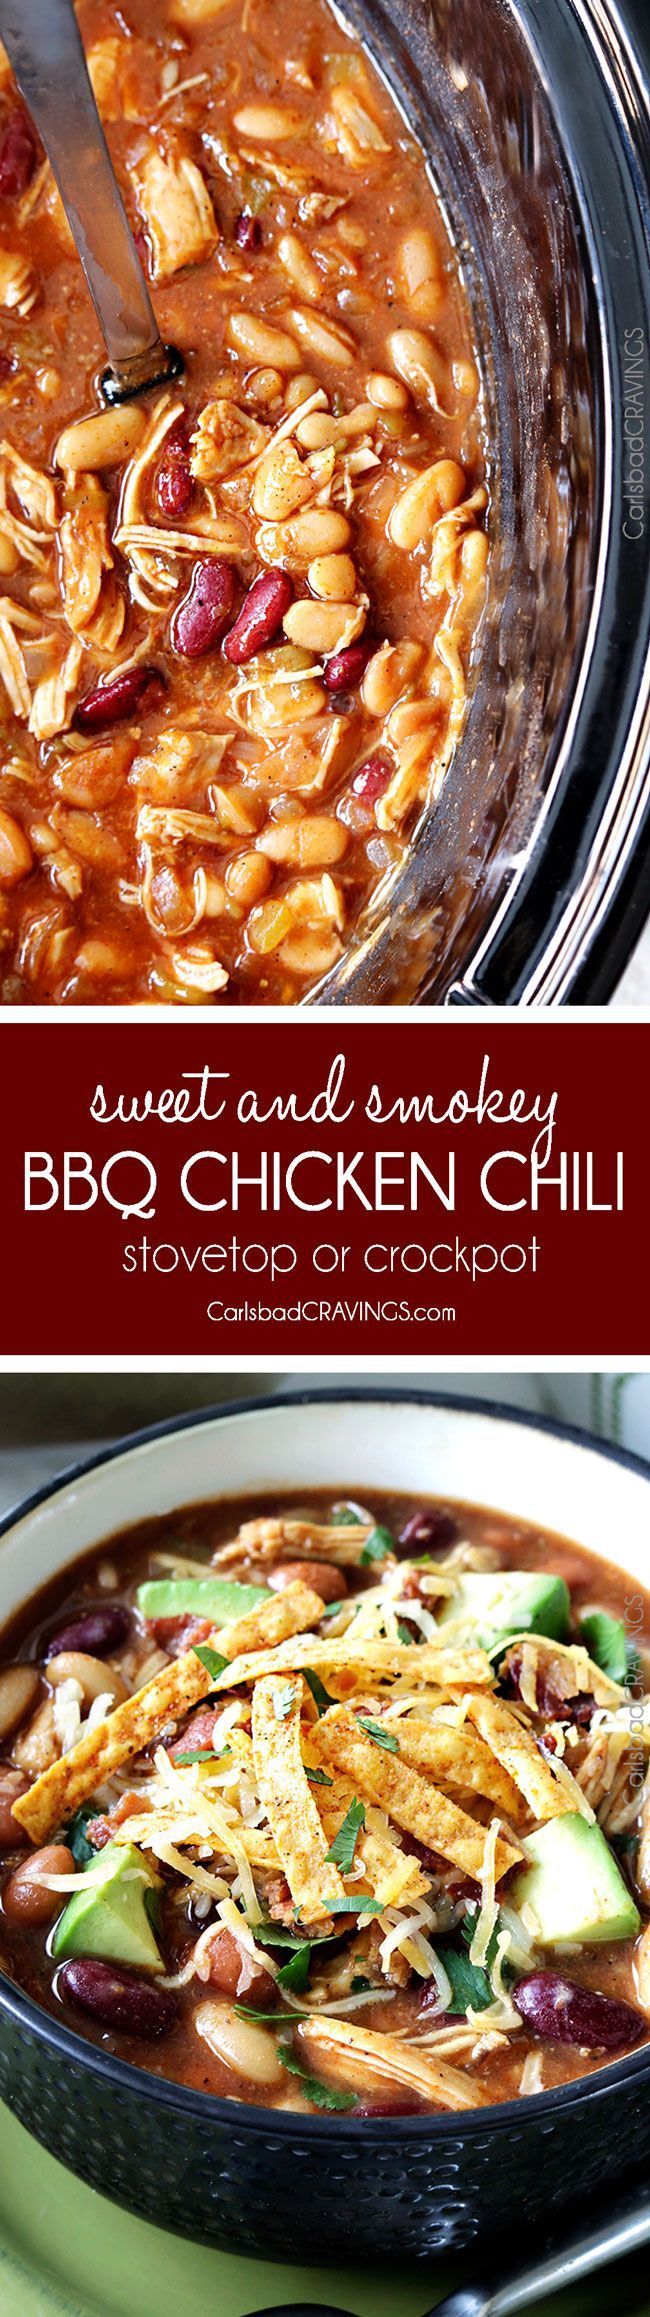 this Sweet and Smokey BBQ Chicken Chili is so good my mom made it for Christmas!